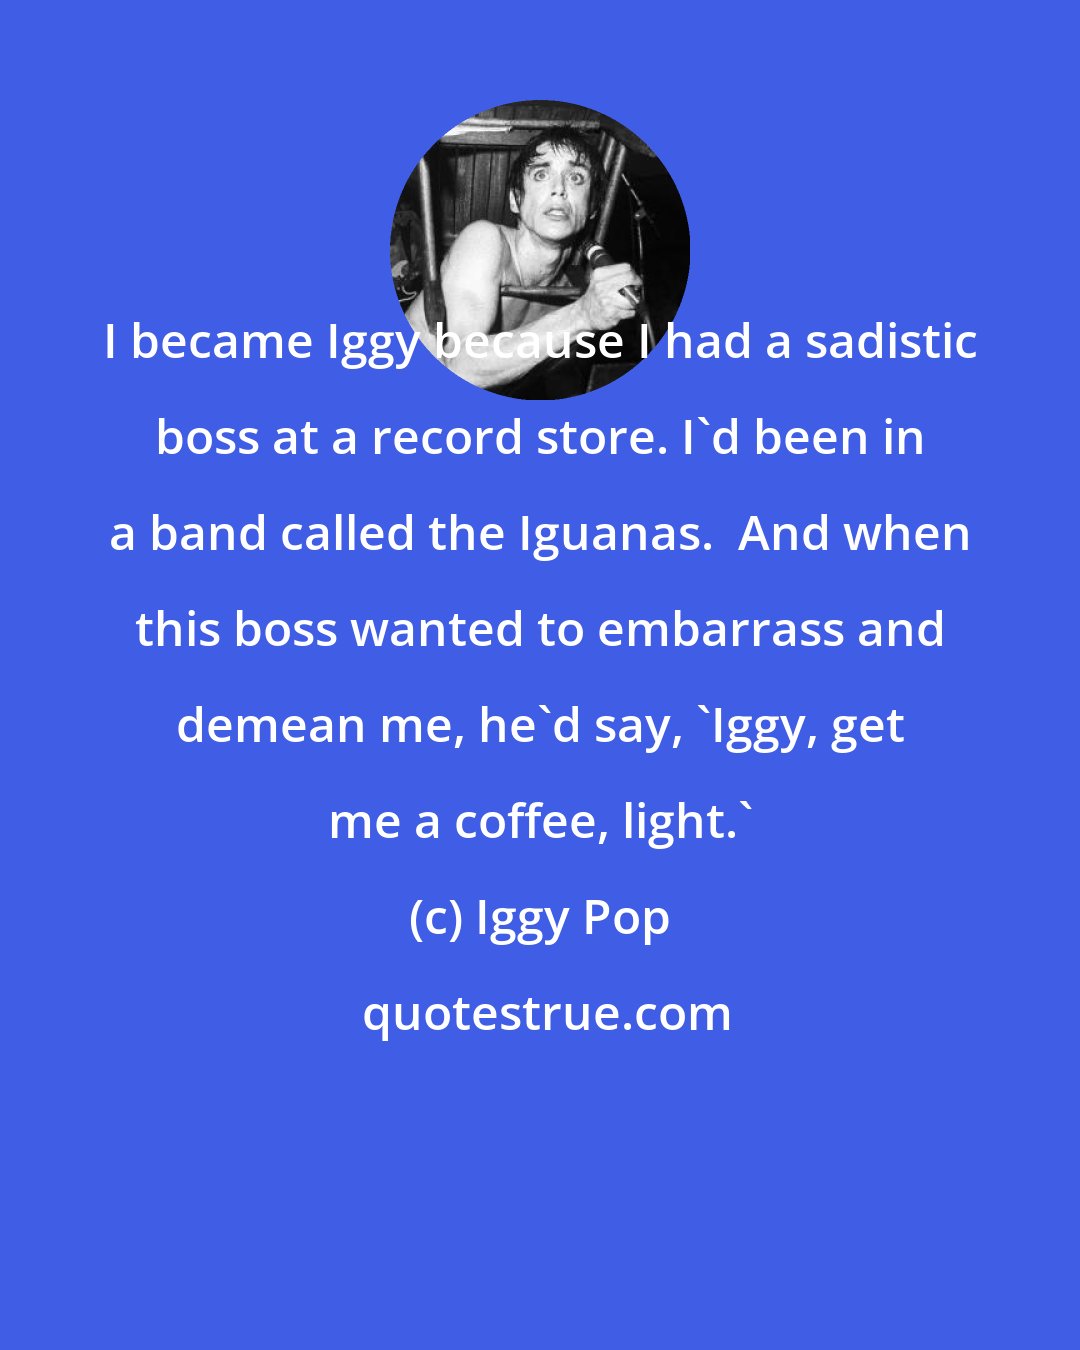 Iggy Pop: I became Iggy because I had a sadistic boss at a record store. I'd been in a band called the Iguanas.  And when this boss wanted to embarrass and demean me, he'd say, 'Iggy, get me a coffee, light.'